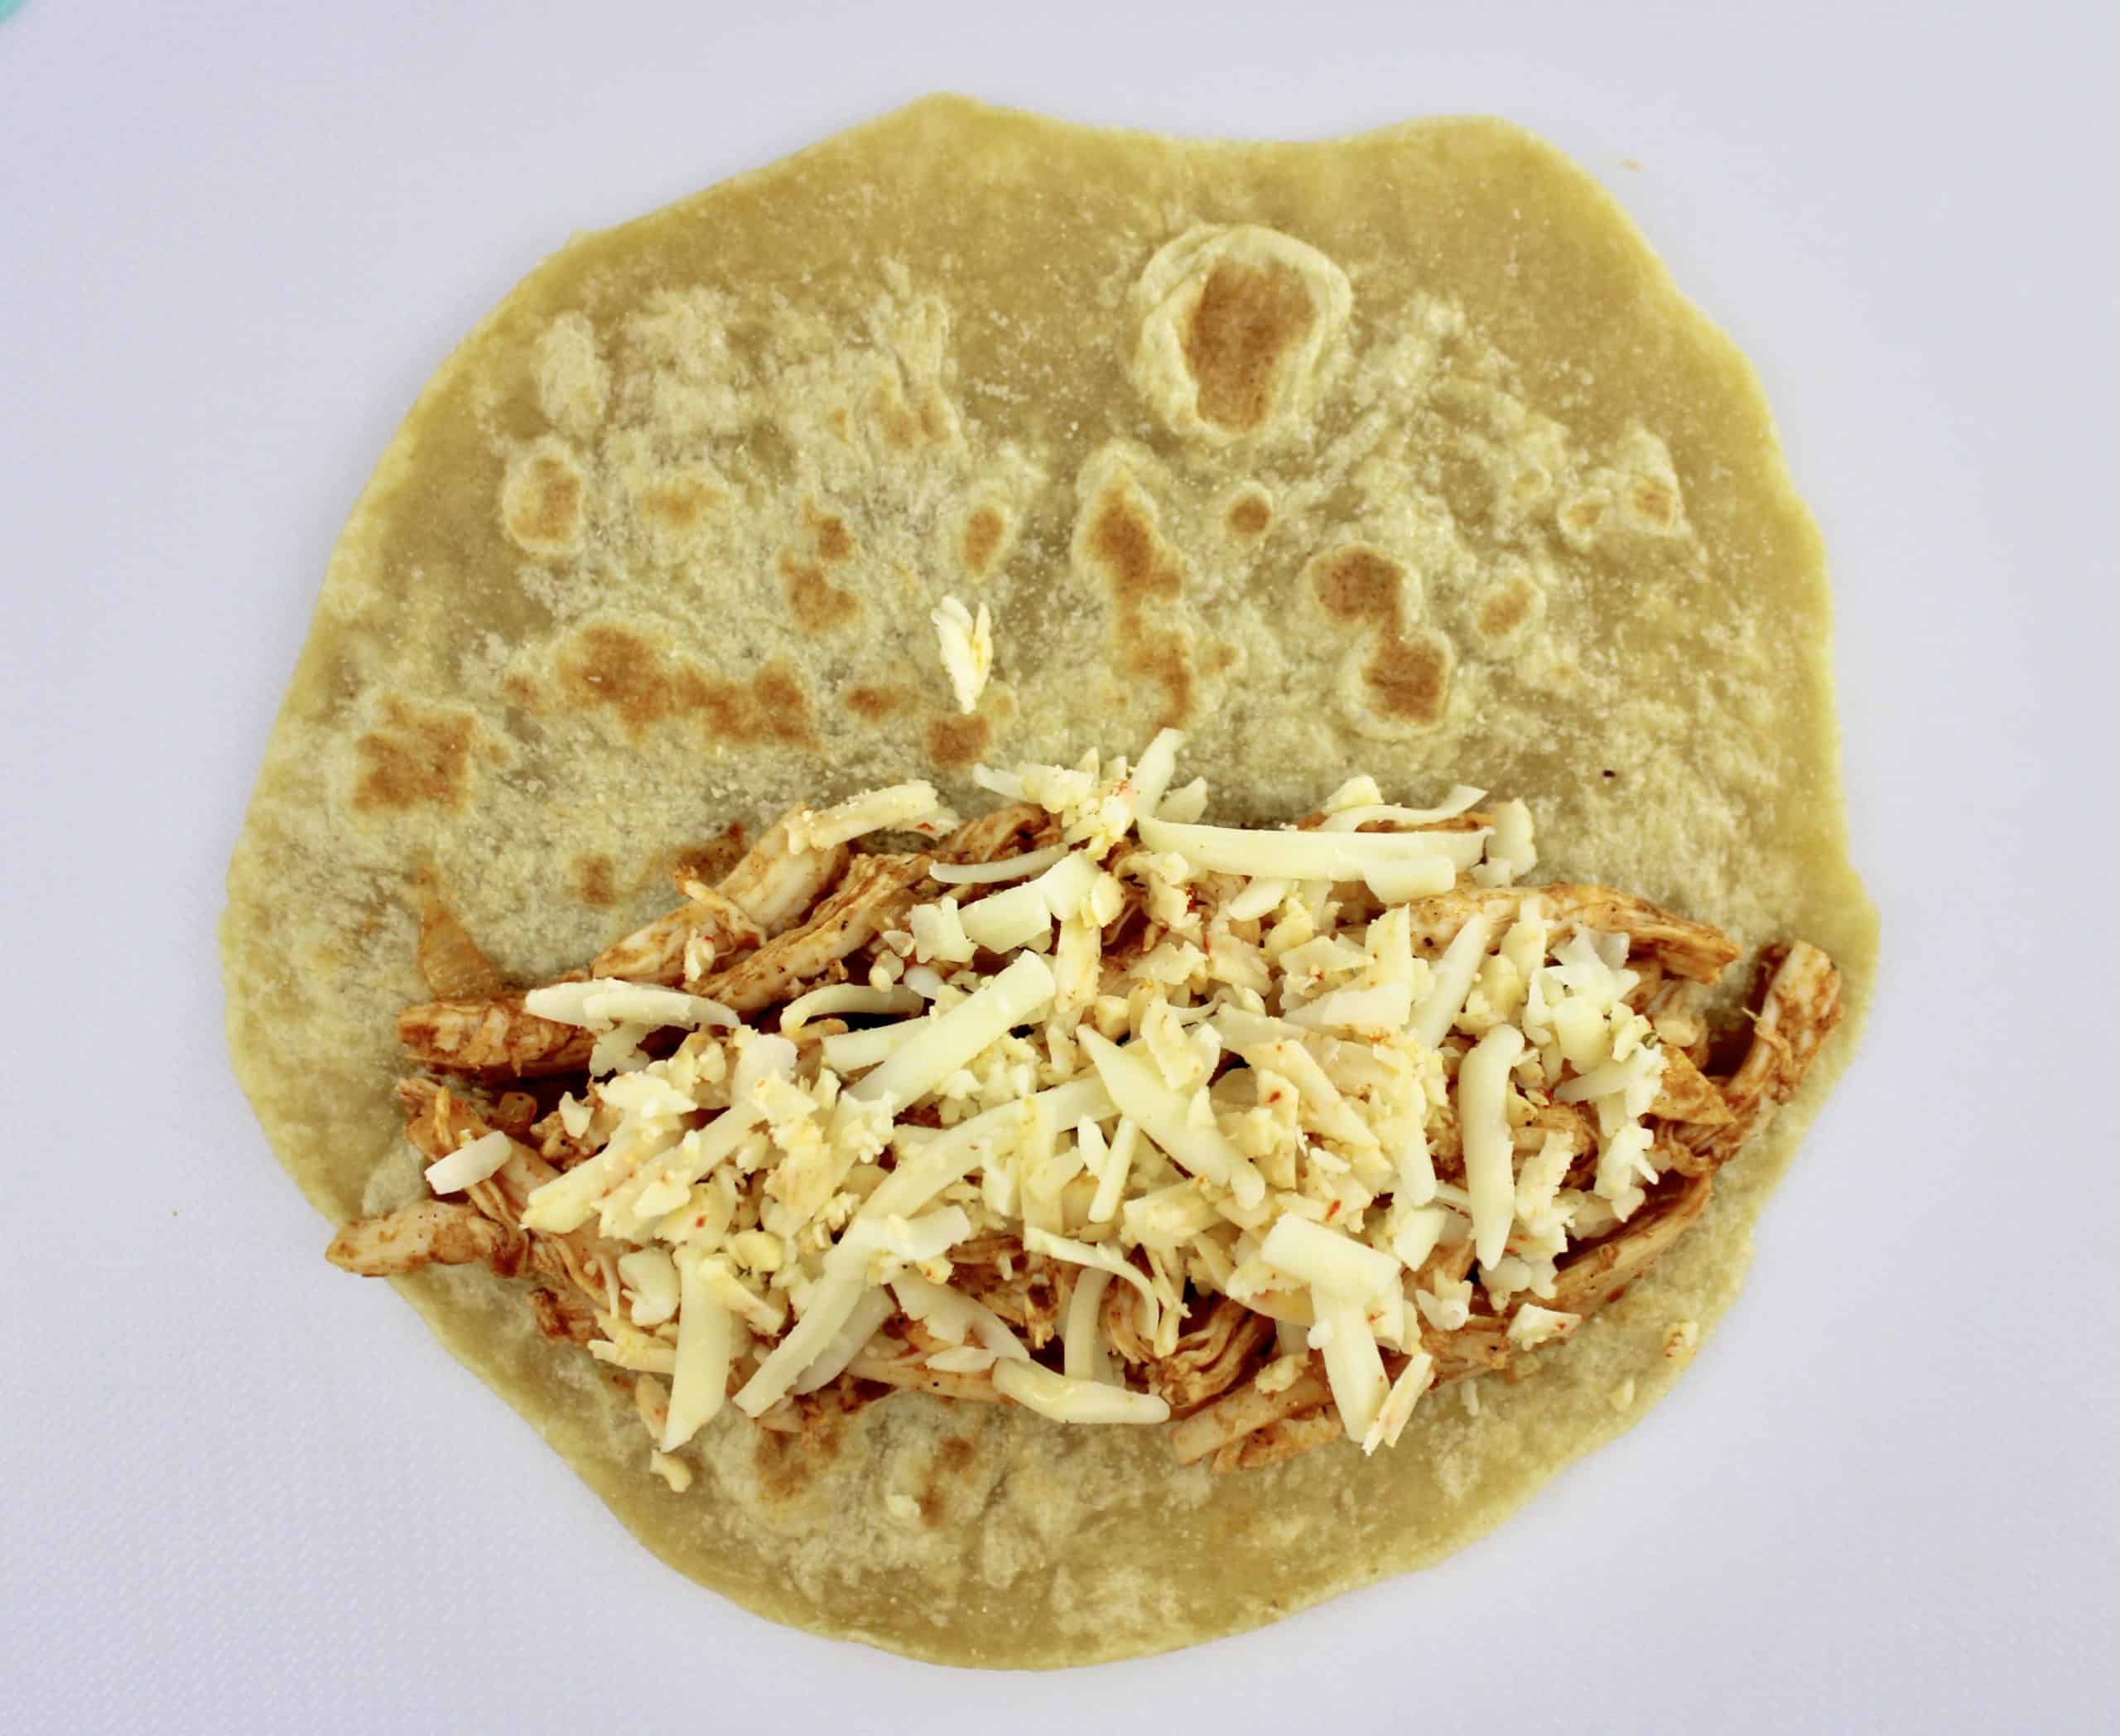 shredded chicken and cheese on open tortilla